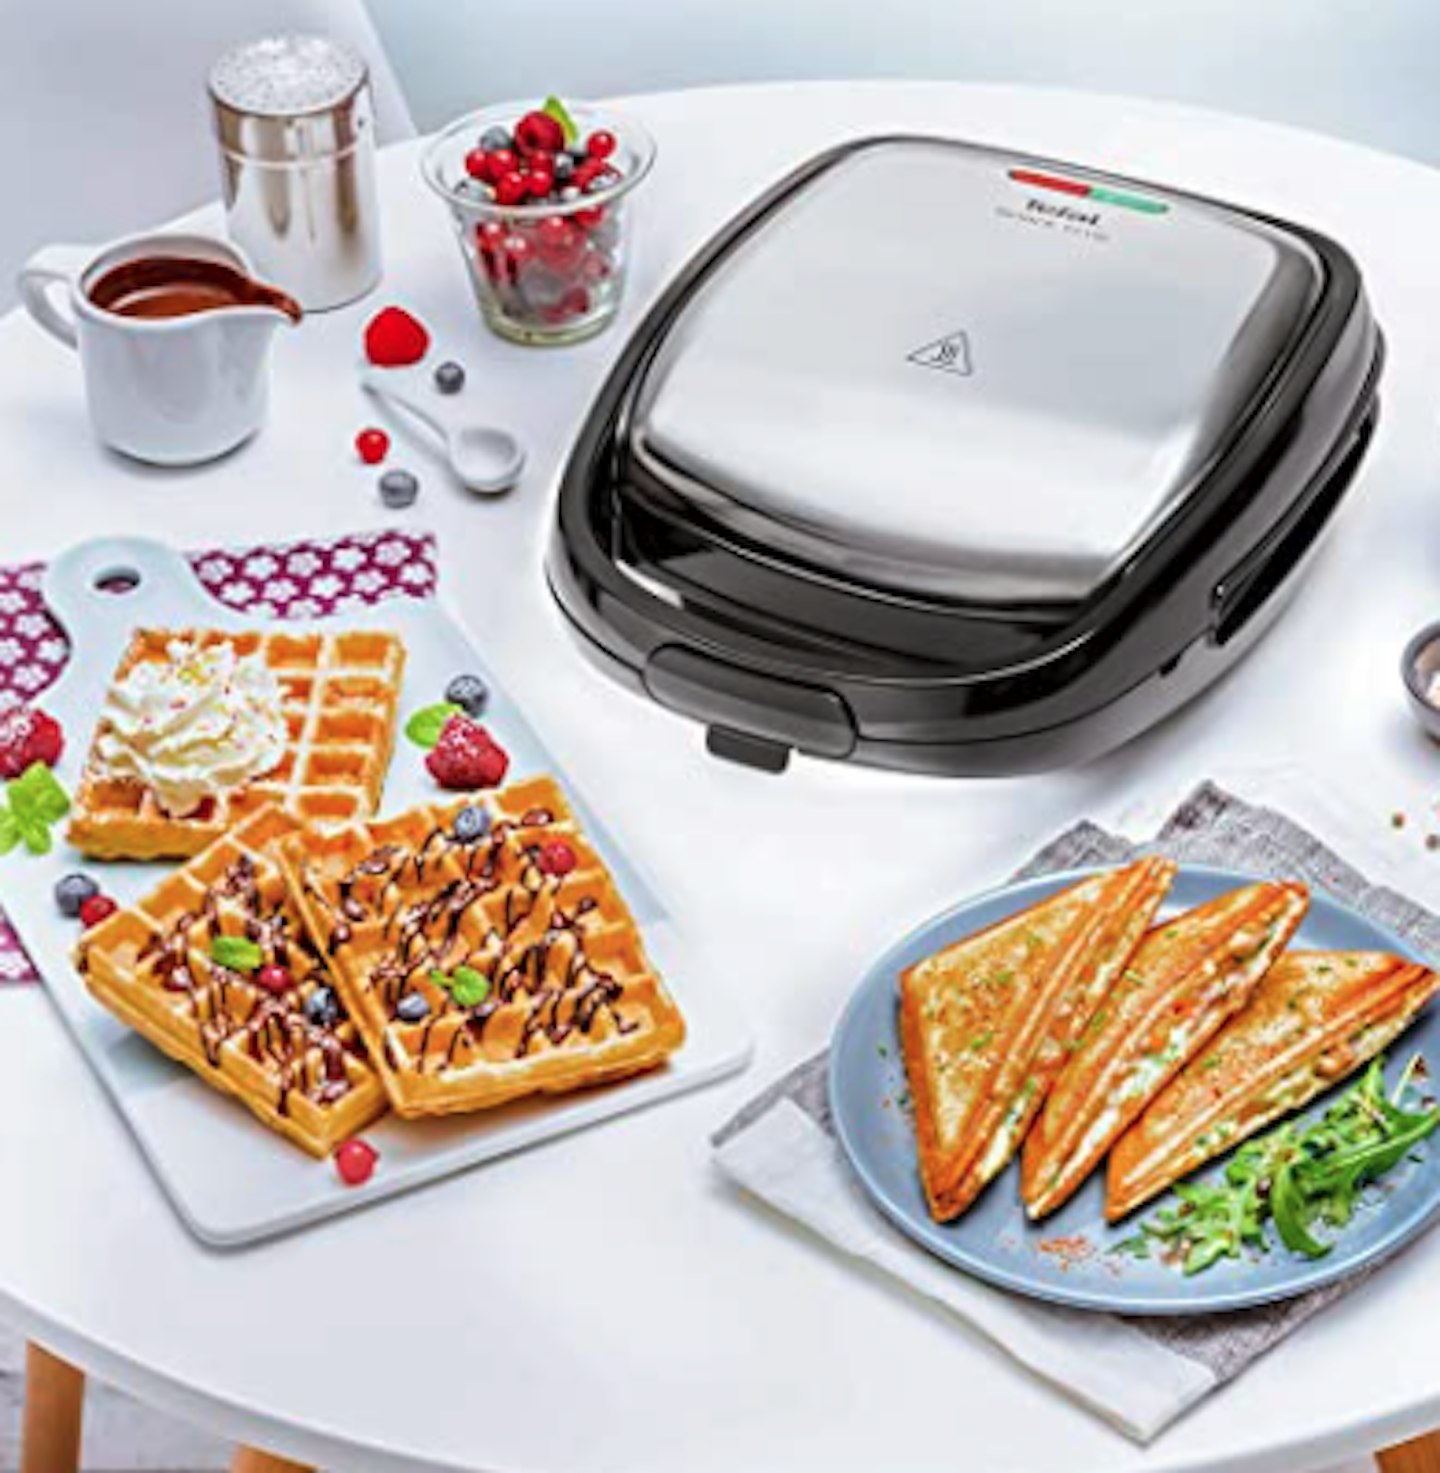 Tefal Snack Time SW341D40 Sandwich and Waffle maker